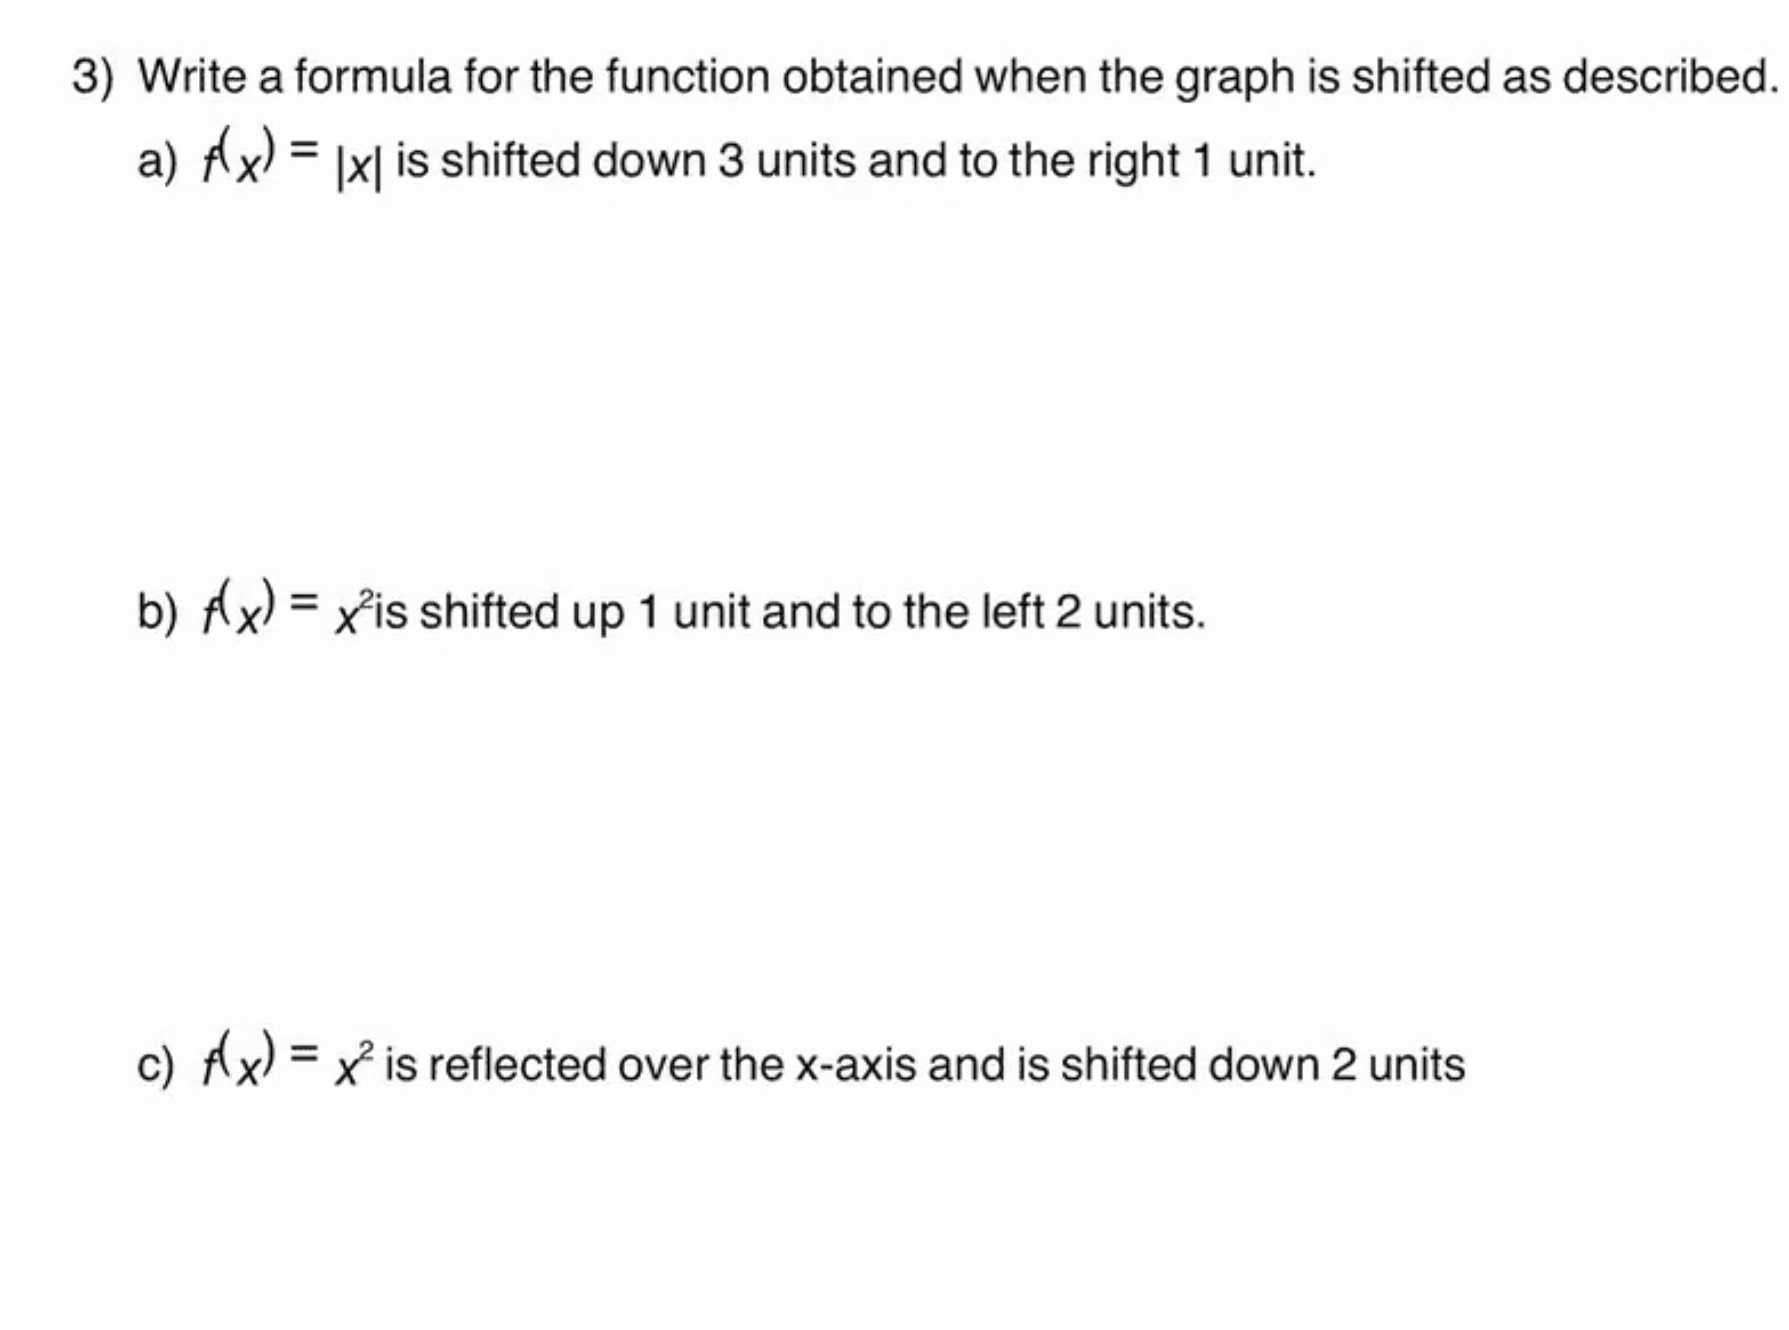 3) Write a formula for the function obtained when...